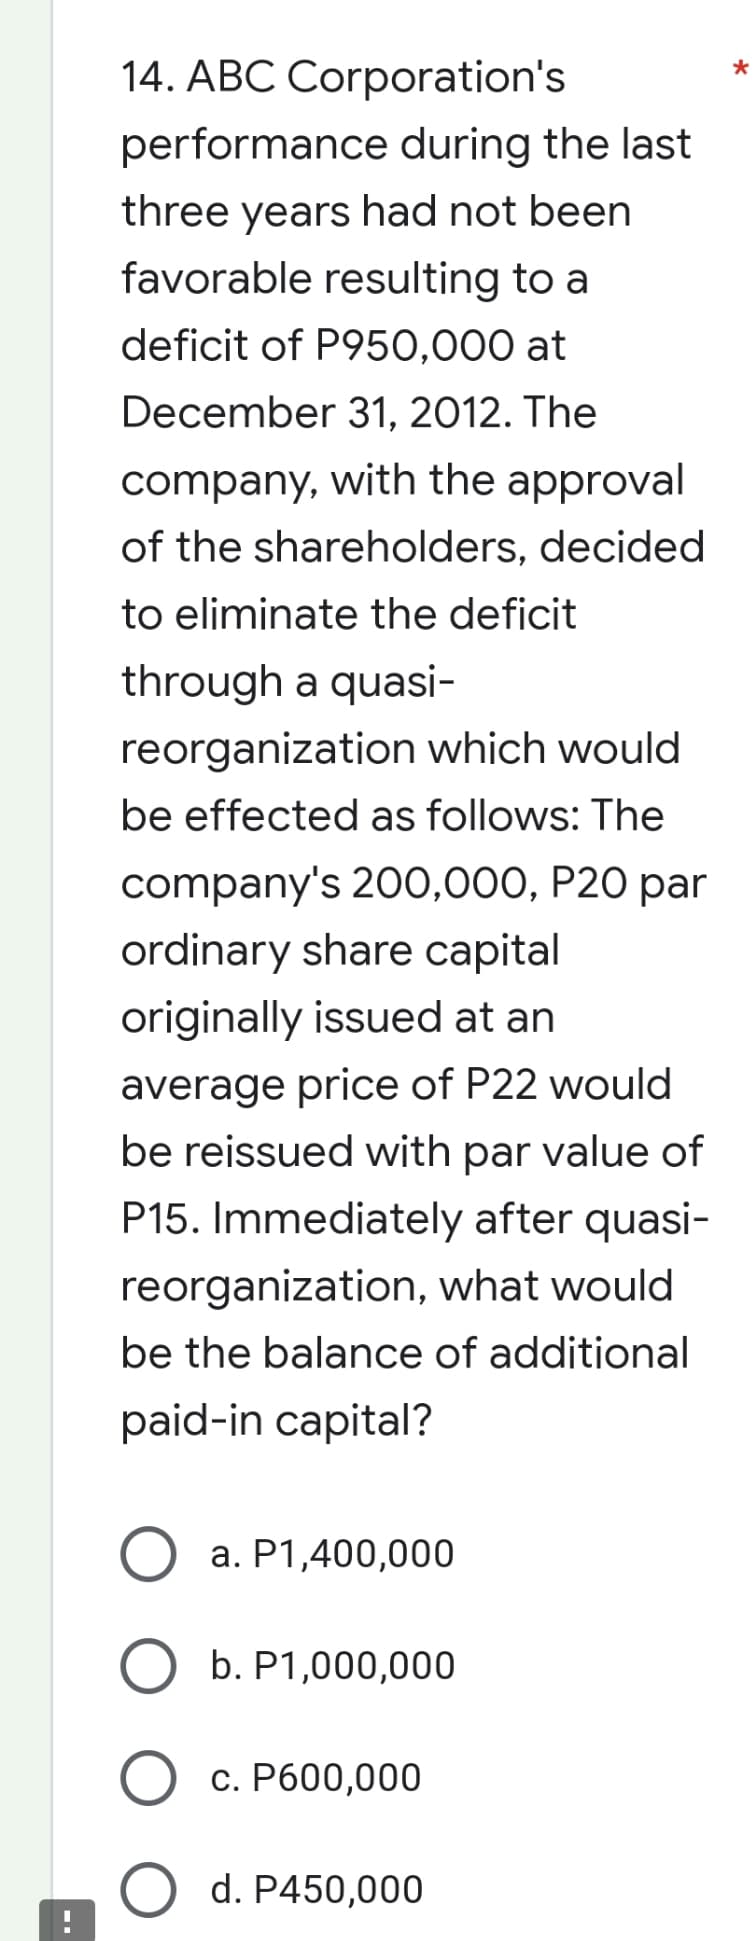 14. ABC Corporation's
performance during the last
three years had not been
favorable resulting to a
deficit of P950,000 at
December 31, 2012. The
company, with the approval
of the shareholders, decided
to eliminate the deficit
through a quasi-
reorganization which would
be effected as follows: The
company's 200,000, P20 par
ordinary share capital
originally issued at an
average price of P22 would
be reissued with par value of
P15. Immediately after quasi-
reorganization, what would
be the balance of additional
paid-in capital?
O a. P1,400,000
O b. P1,000,000
c. P600,000
d. P450,000